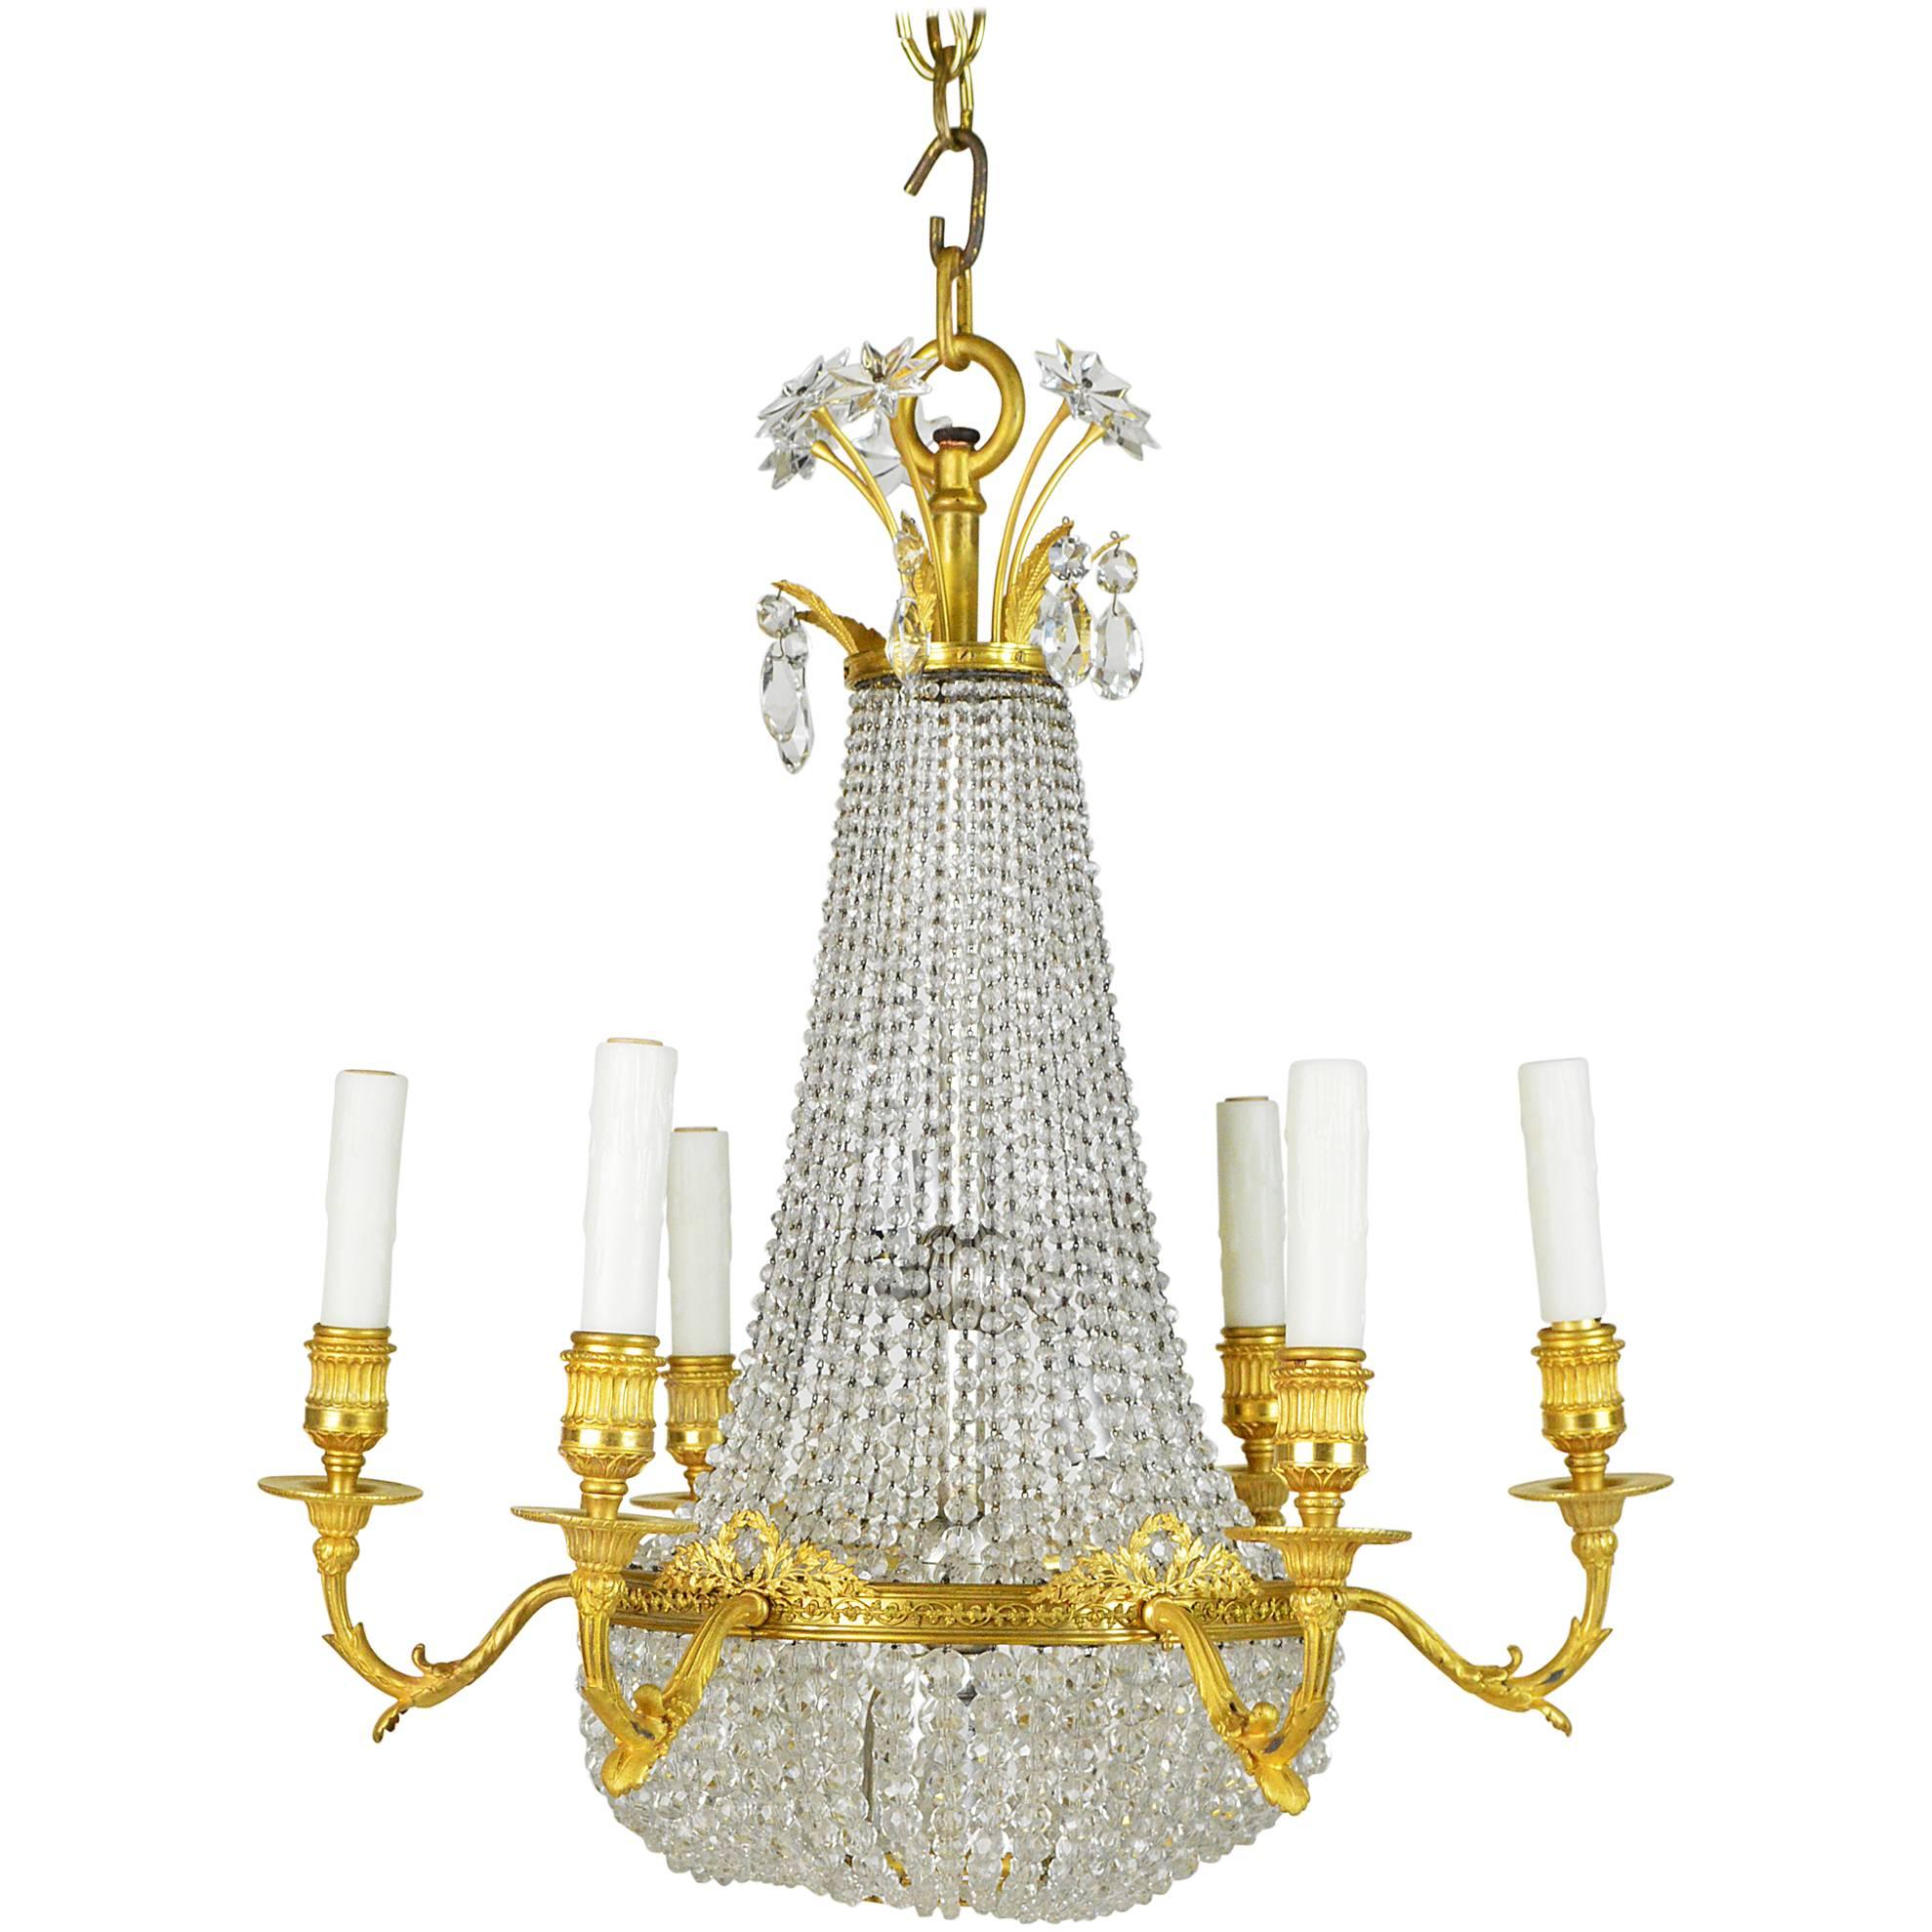 French Empire Style Gilt Bronze and Beaded Six-Light Chandelier For Sale